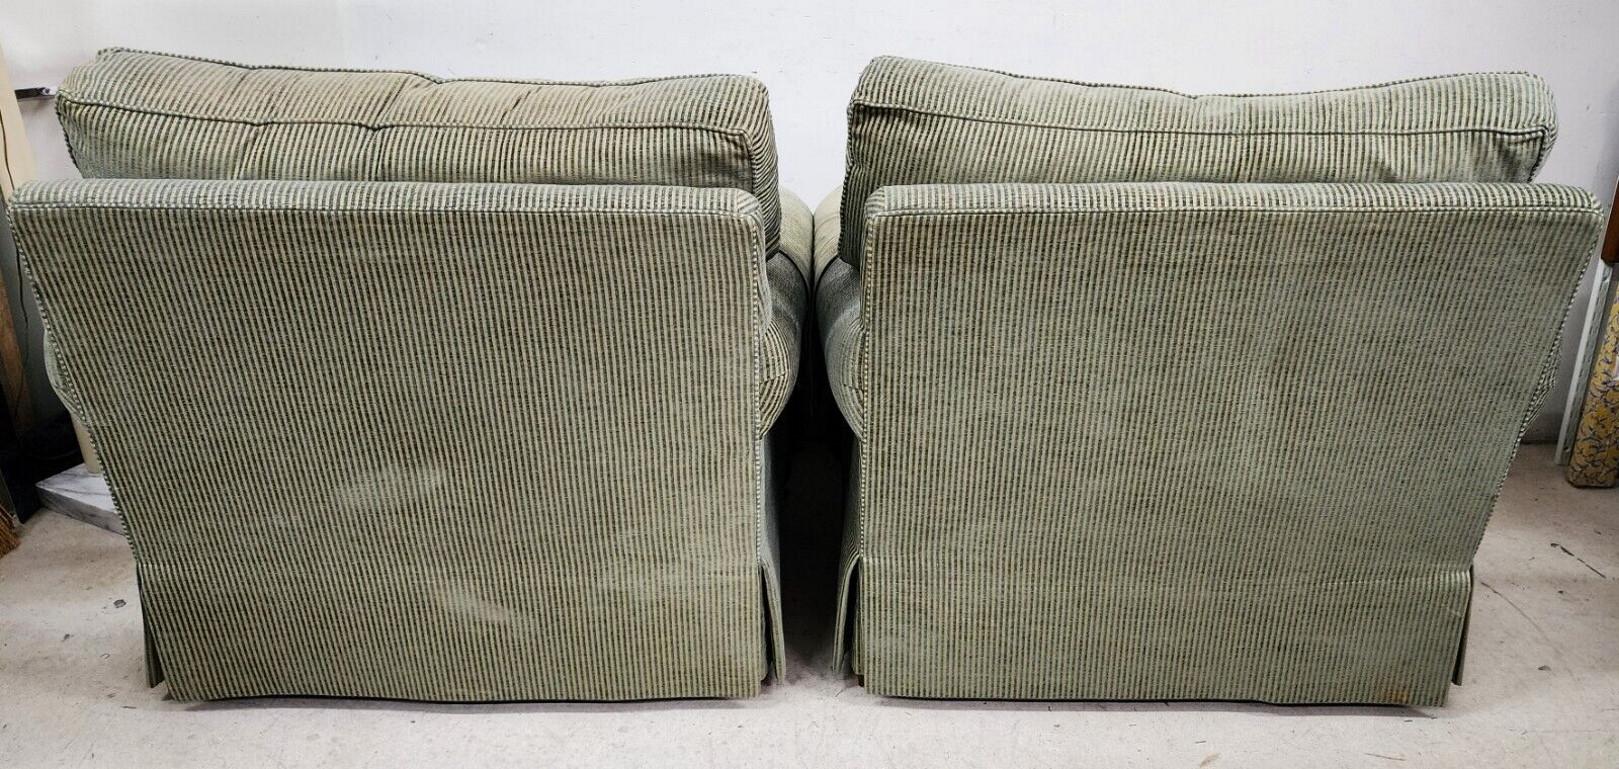 Oversized Lounge Chairs by HICKORY CHAIR - Set of 2 In Good Condition For Sale In Lake Worth, FL